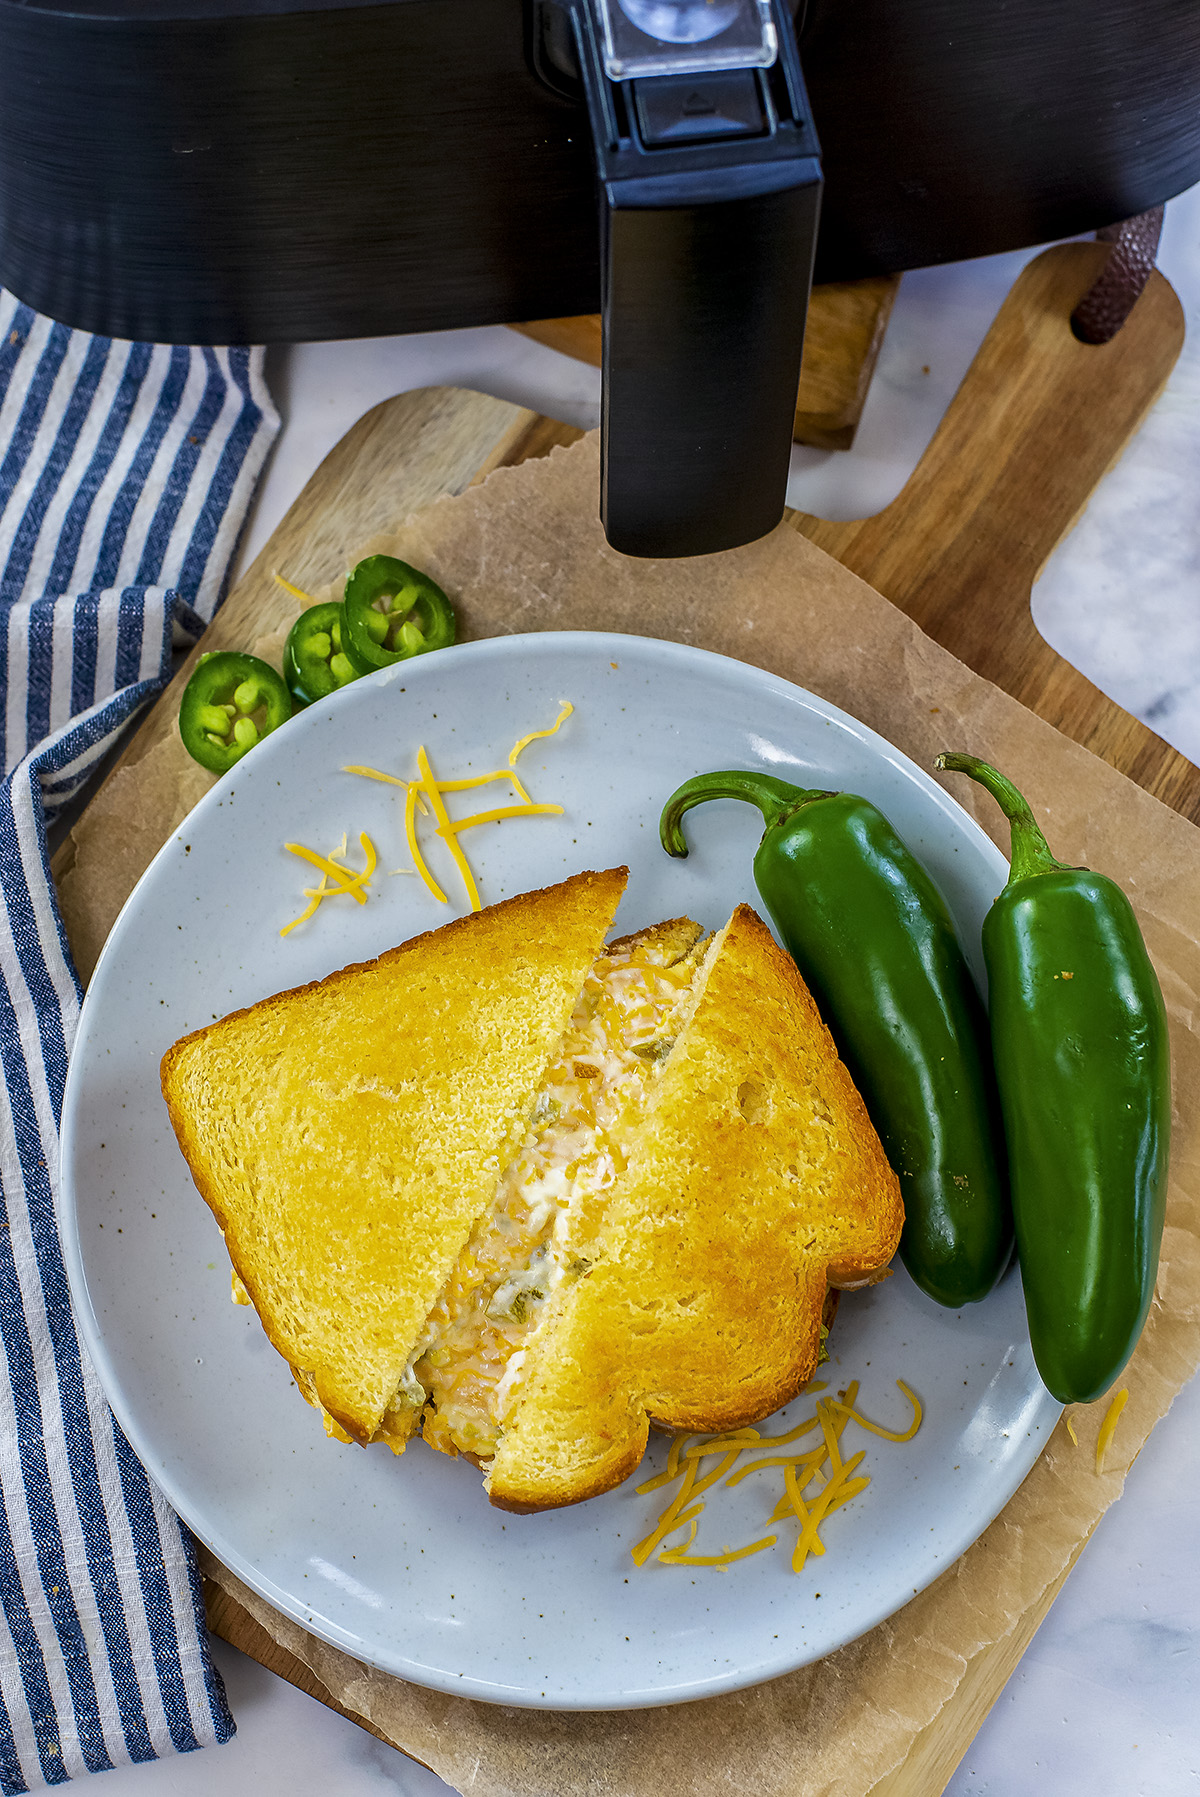 Jalapeno popper grilled cheese in front of an air fryer basket.